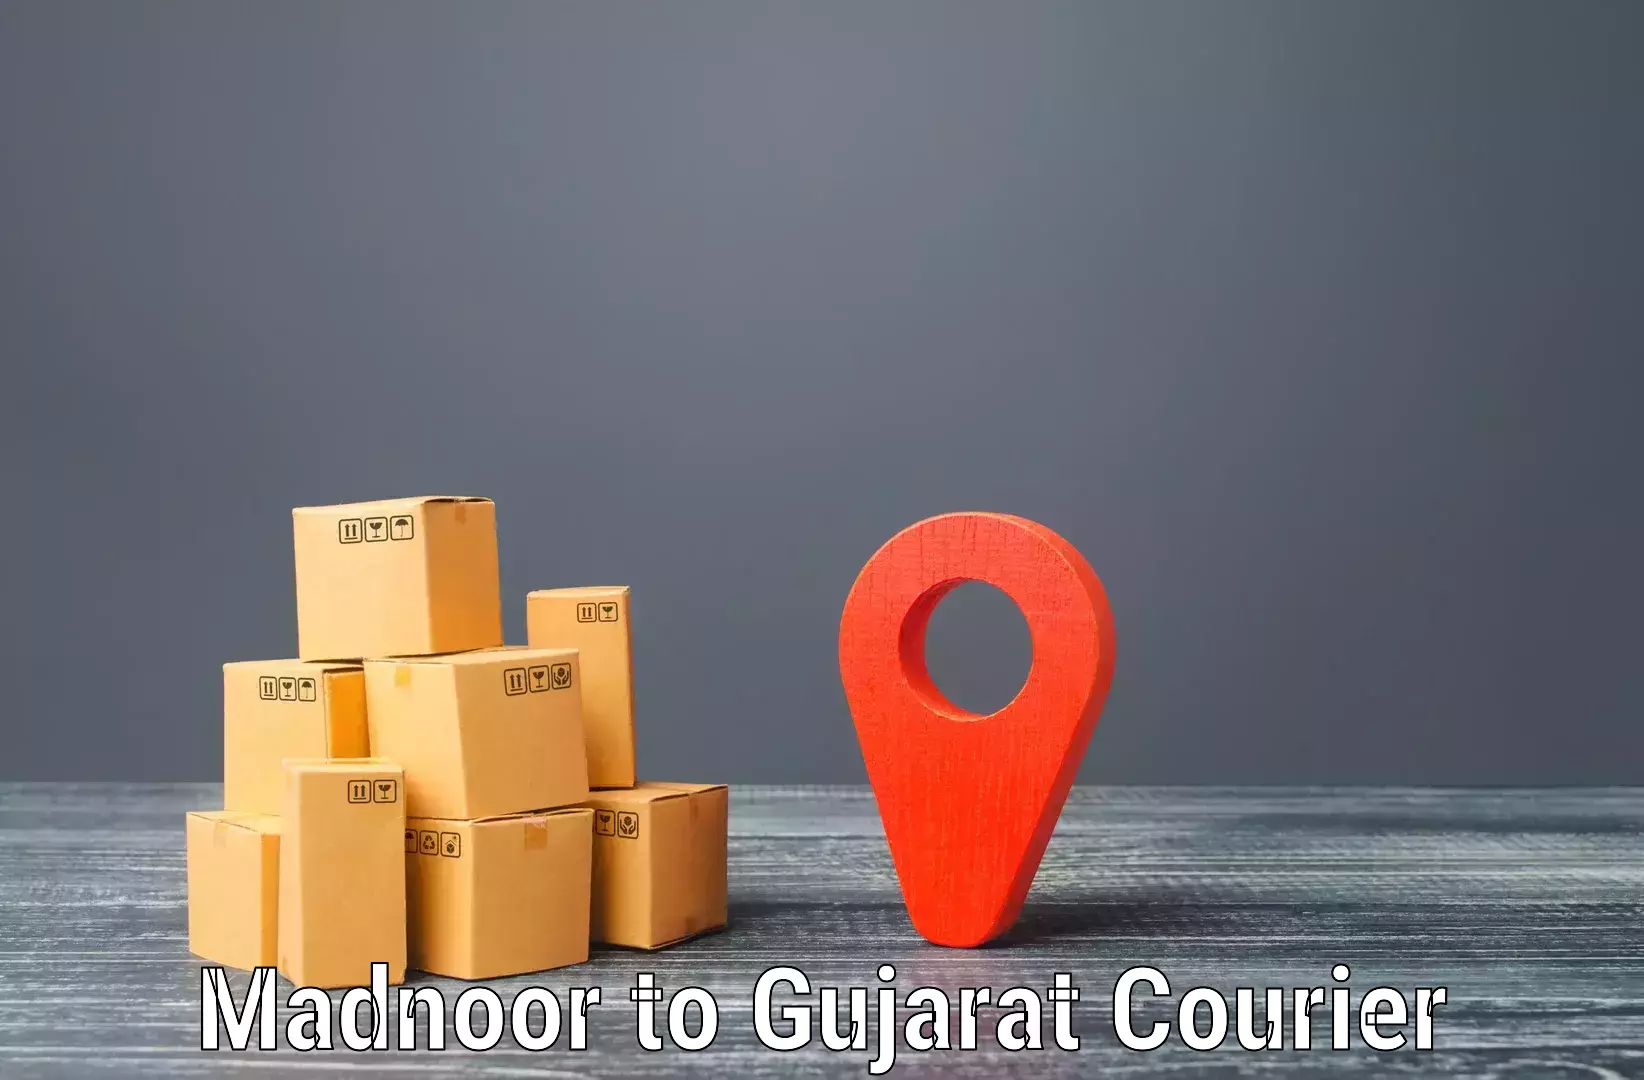 Multi-package shipping Madnoor to Patan Gujarat